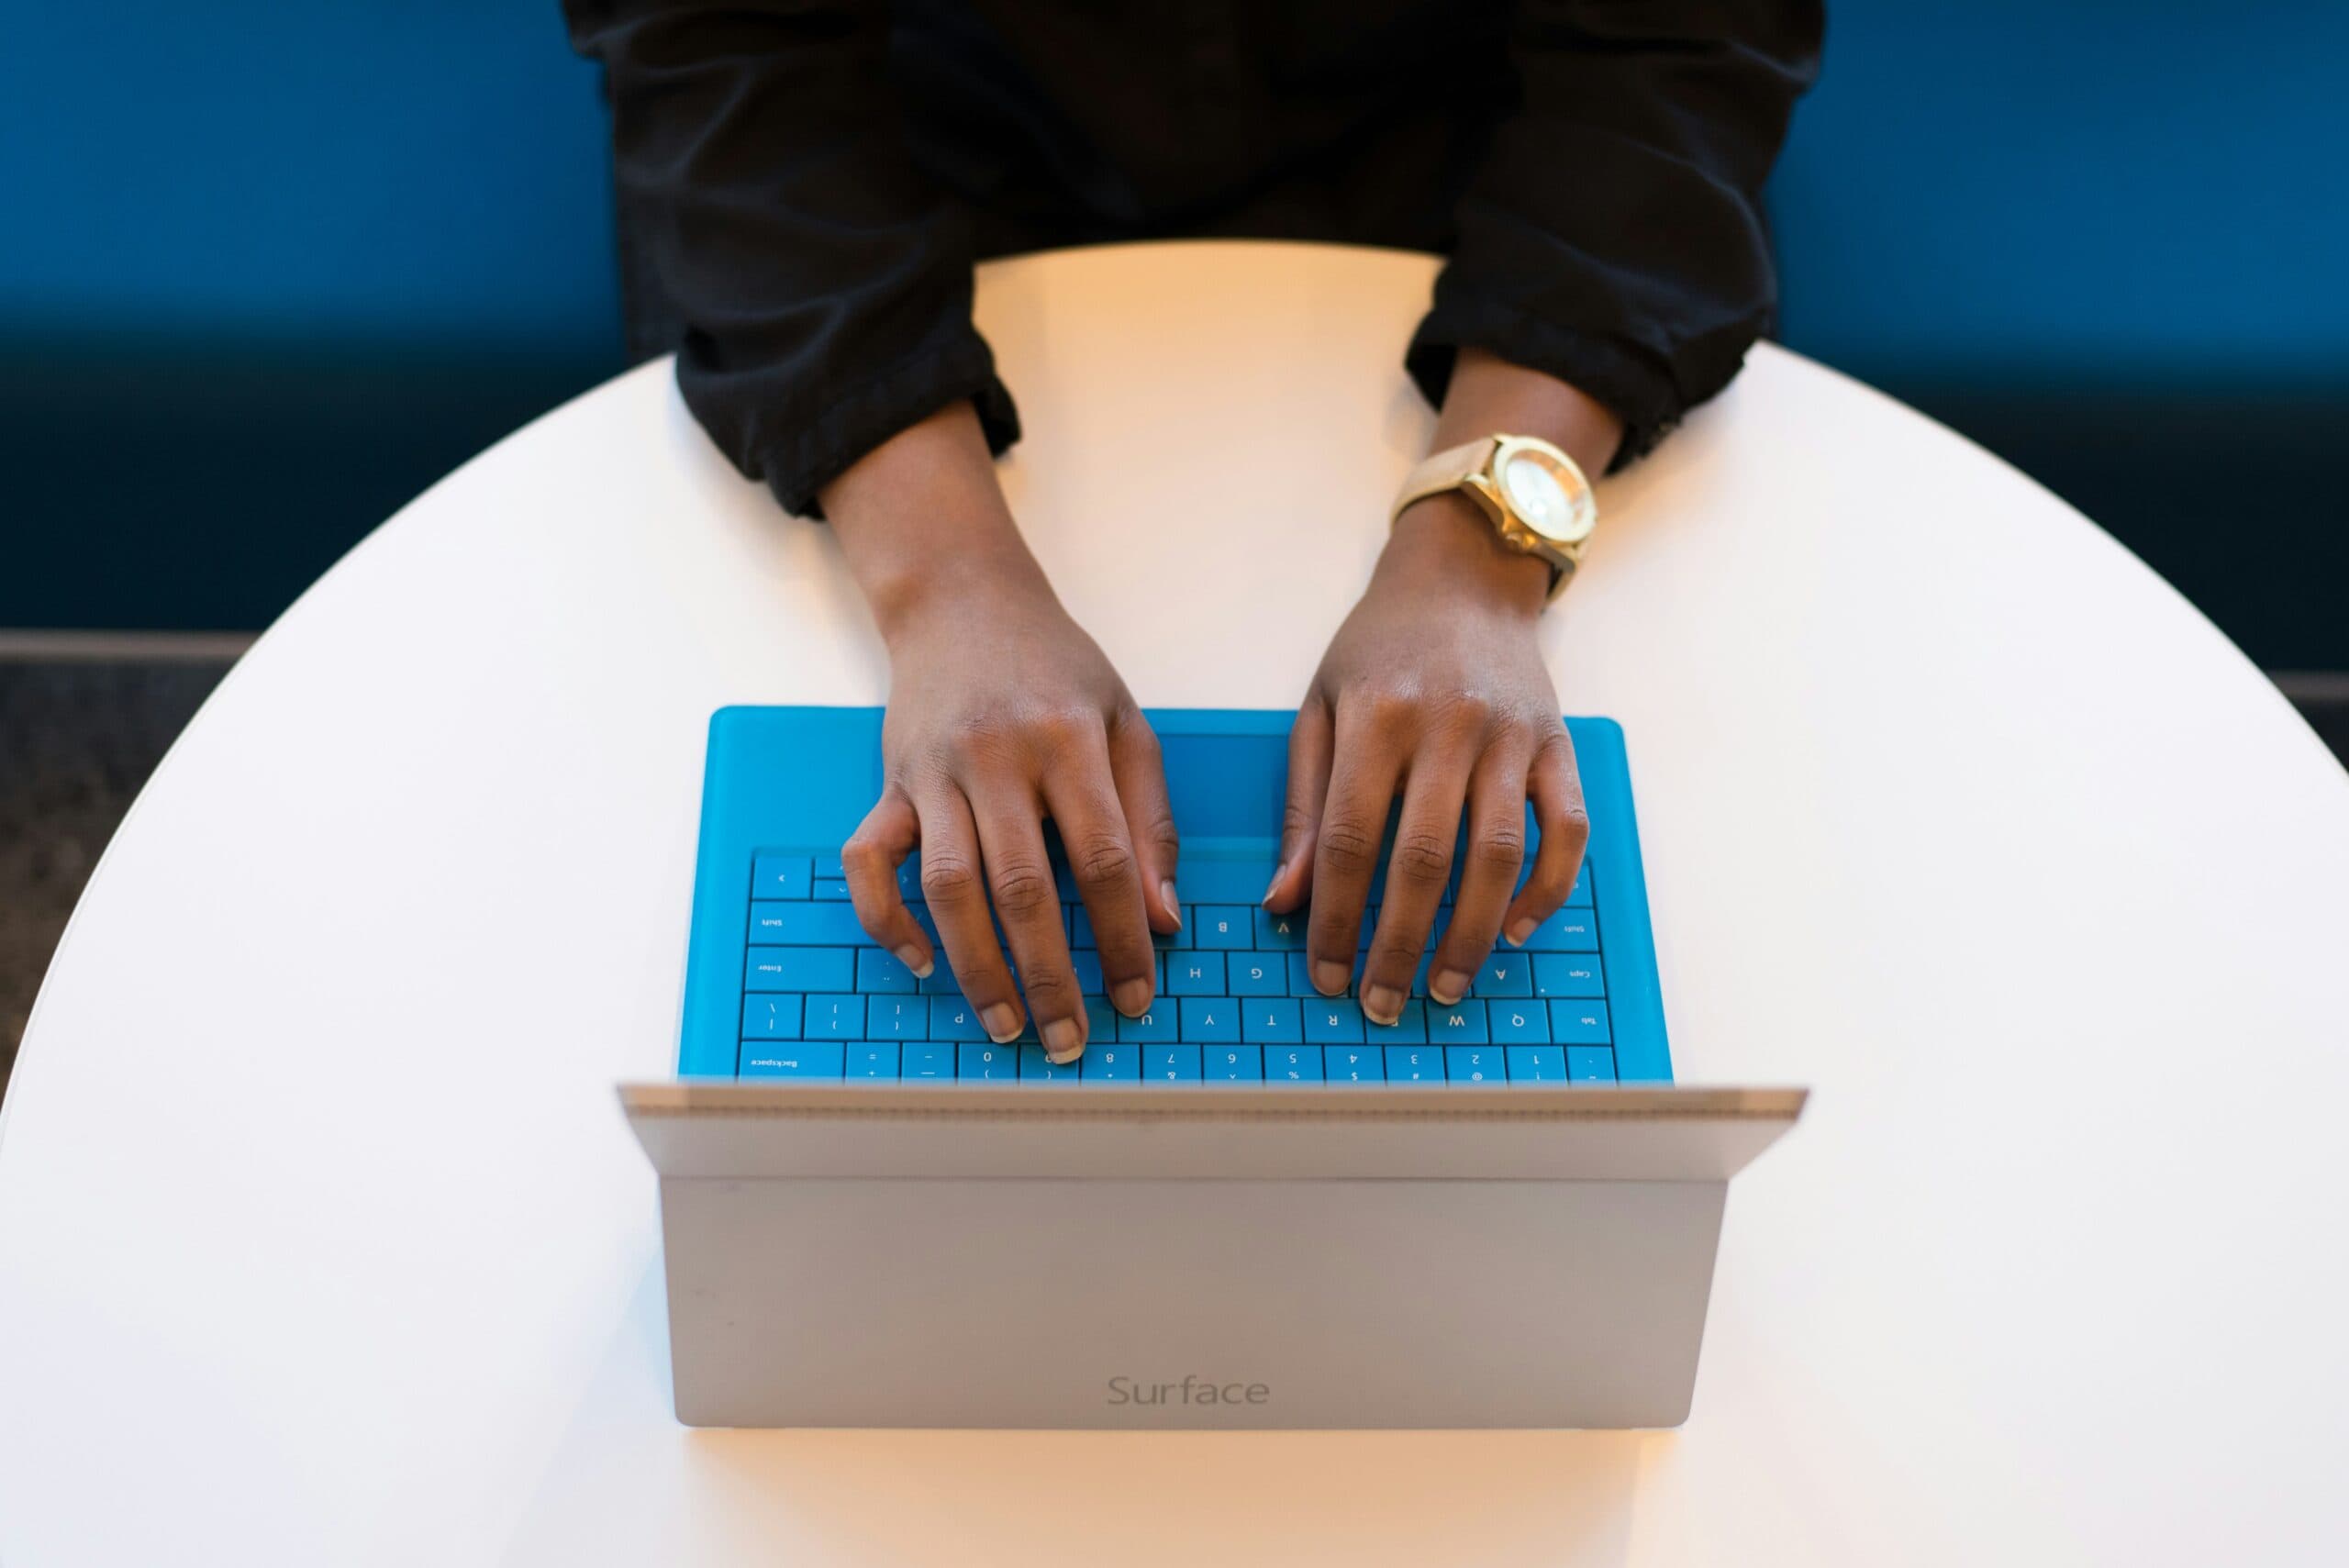 A woman's hands diligently typing on a blue surface laptop, researching, “how can I protect my privacy”.